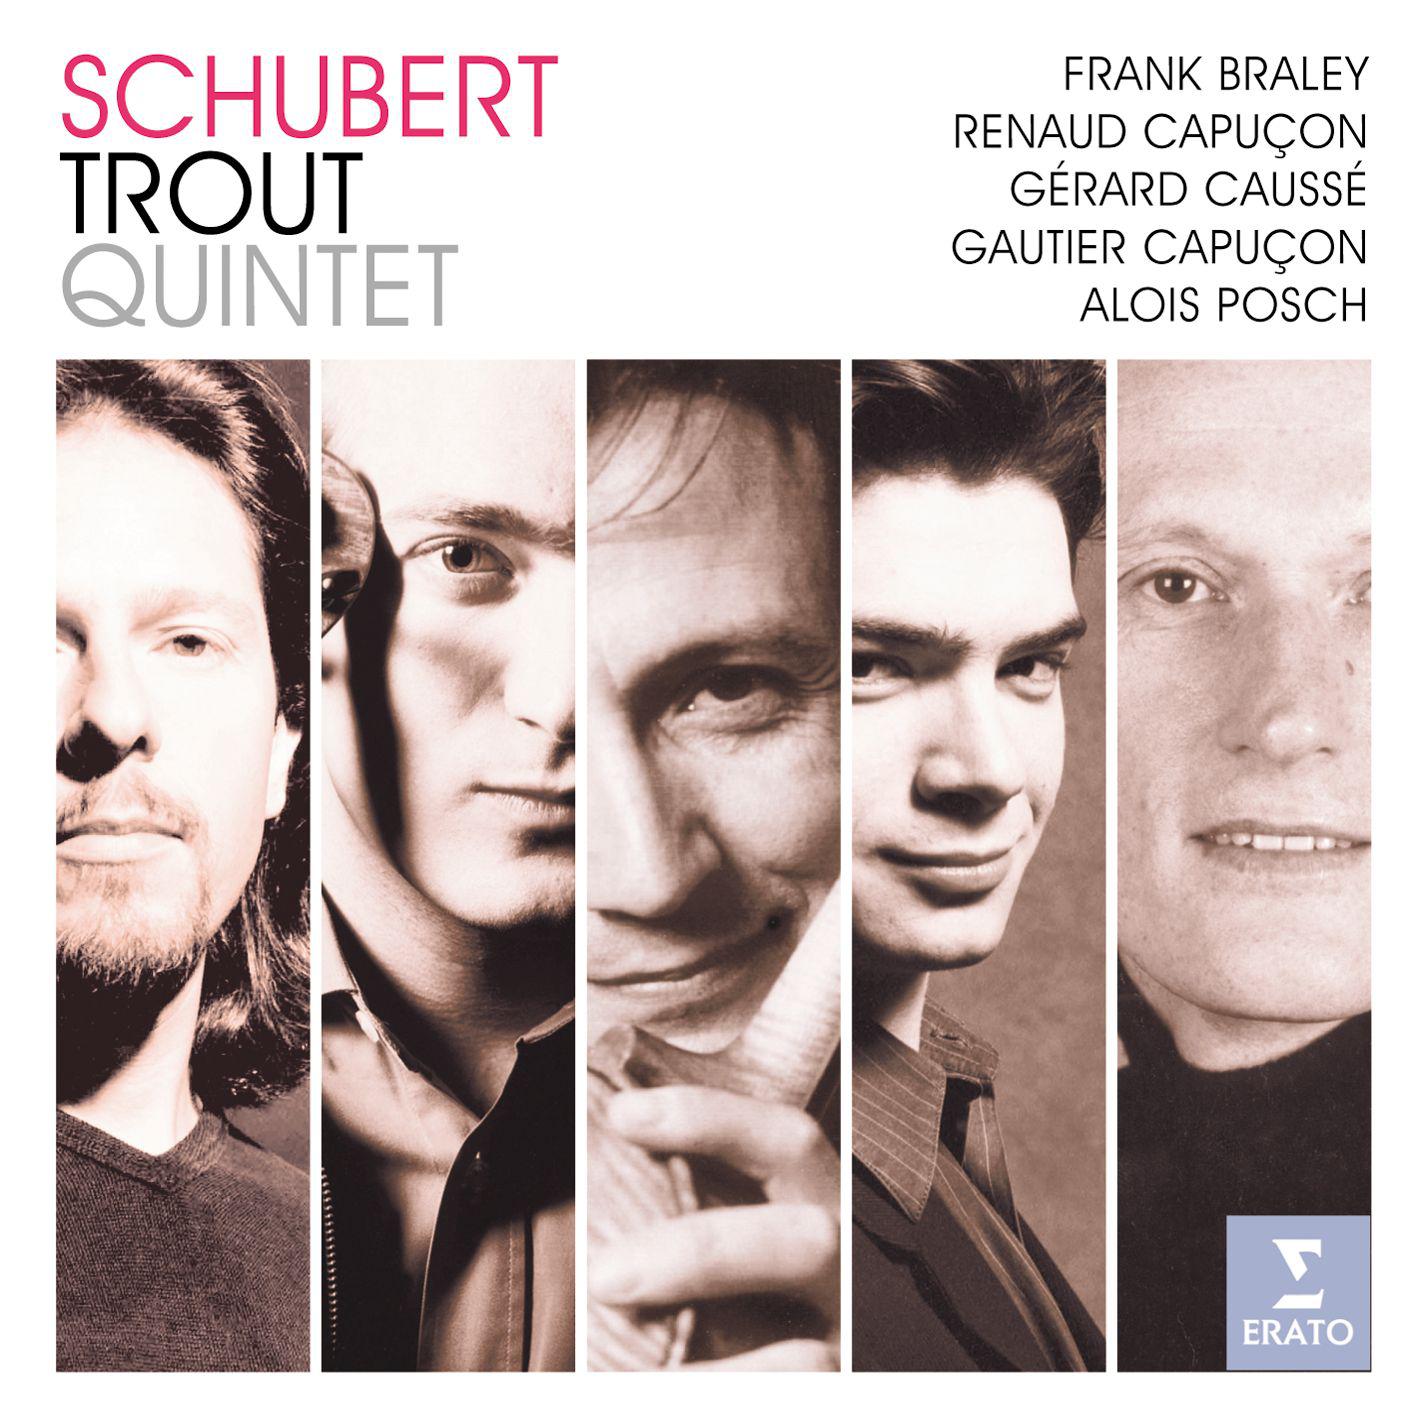 Piano Quintet in A 'The Trout' D667:II. Andante